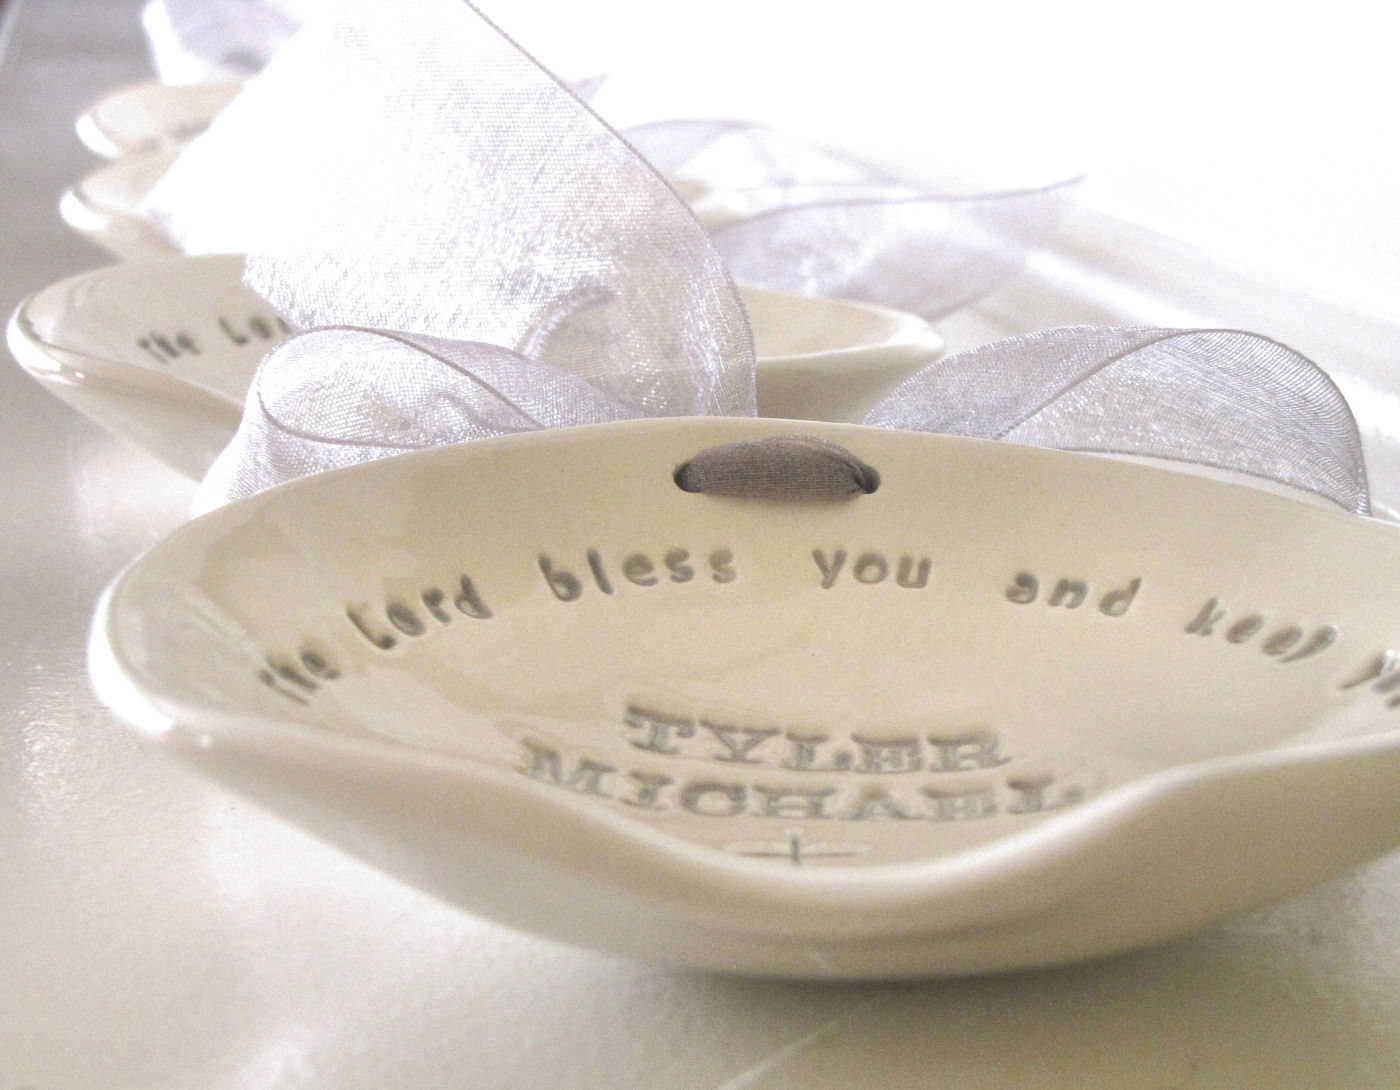 Boys Christening Gift Ideas
 Which Baptism Gifts For Boys Are Appropriate